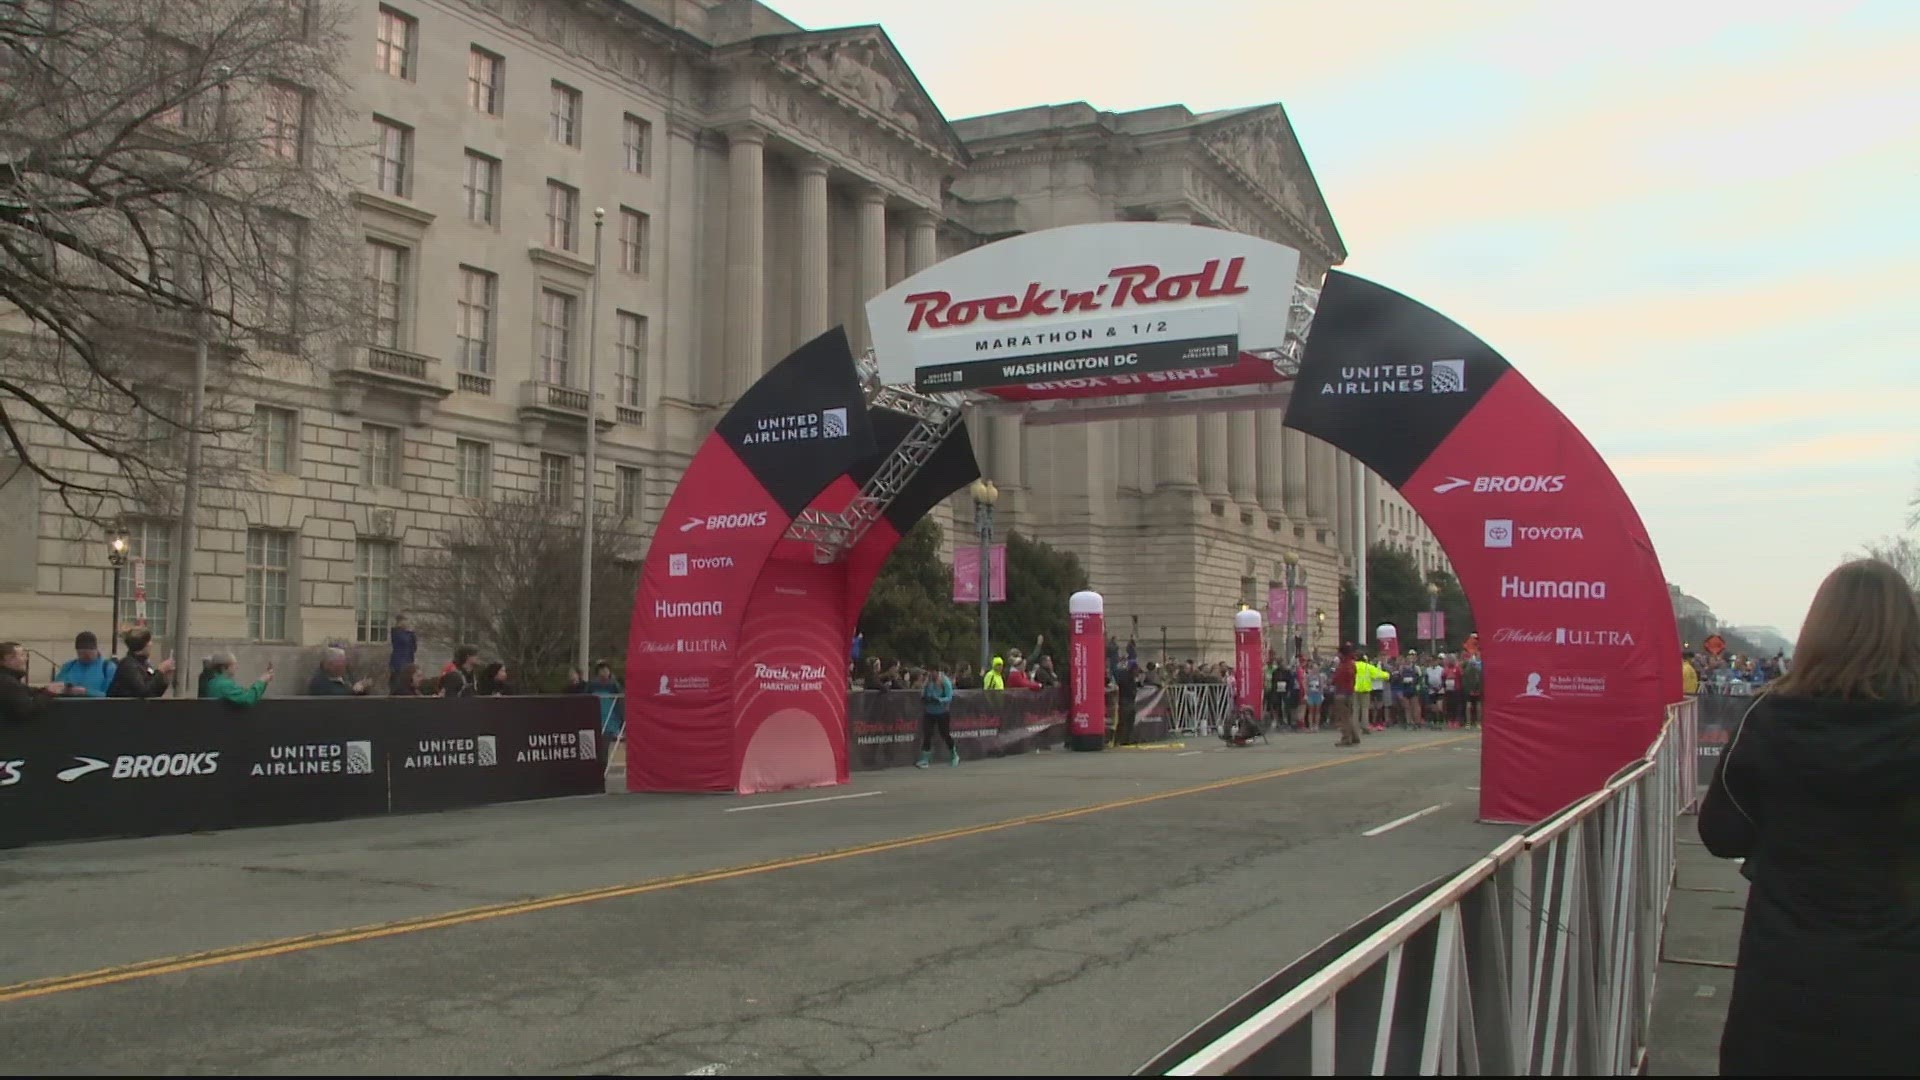 The Rock 'n' Roll Half Marathon and 5K is taking place in Washington D.C. this Saturday, March 18.